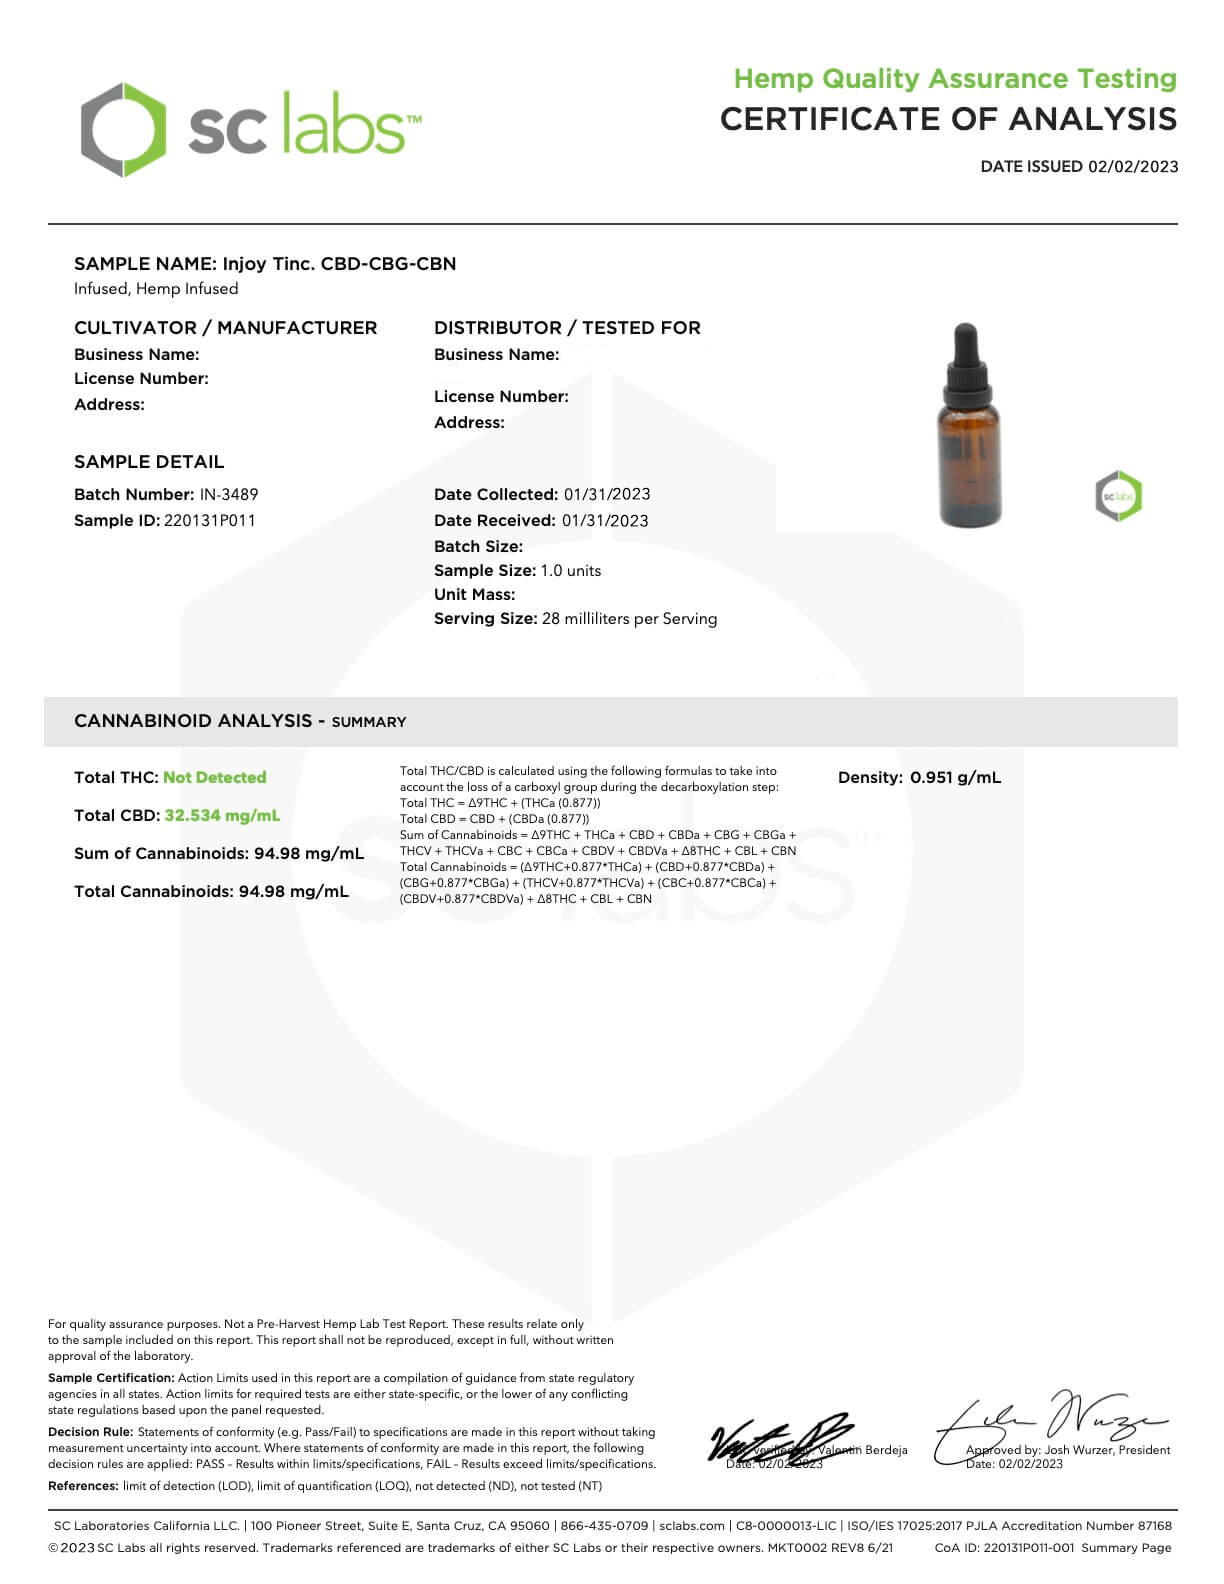 lab test for a tincture with CBD, CBG and CBN.